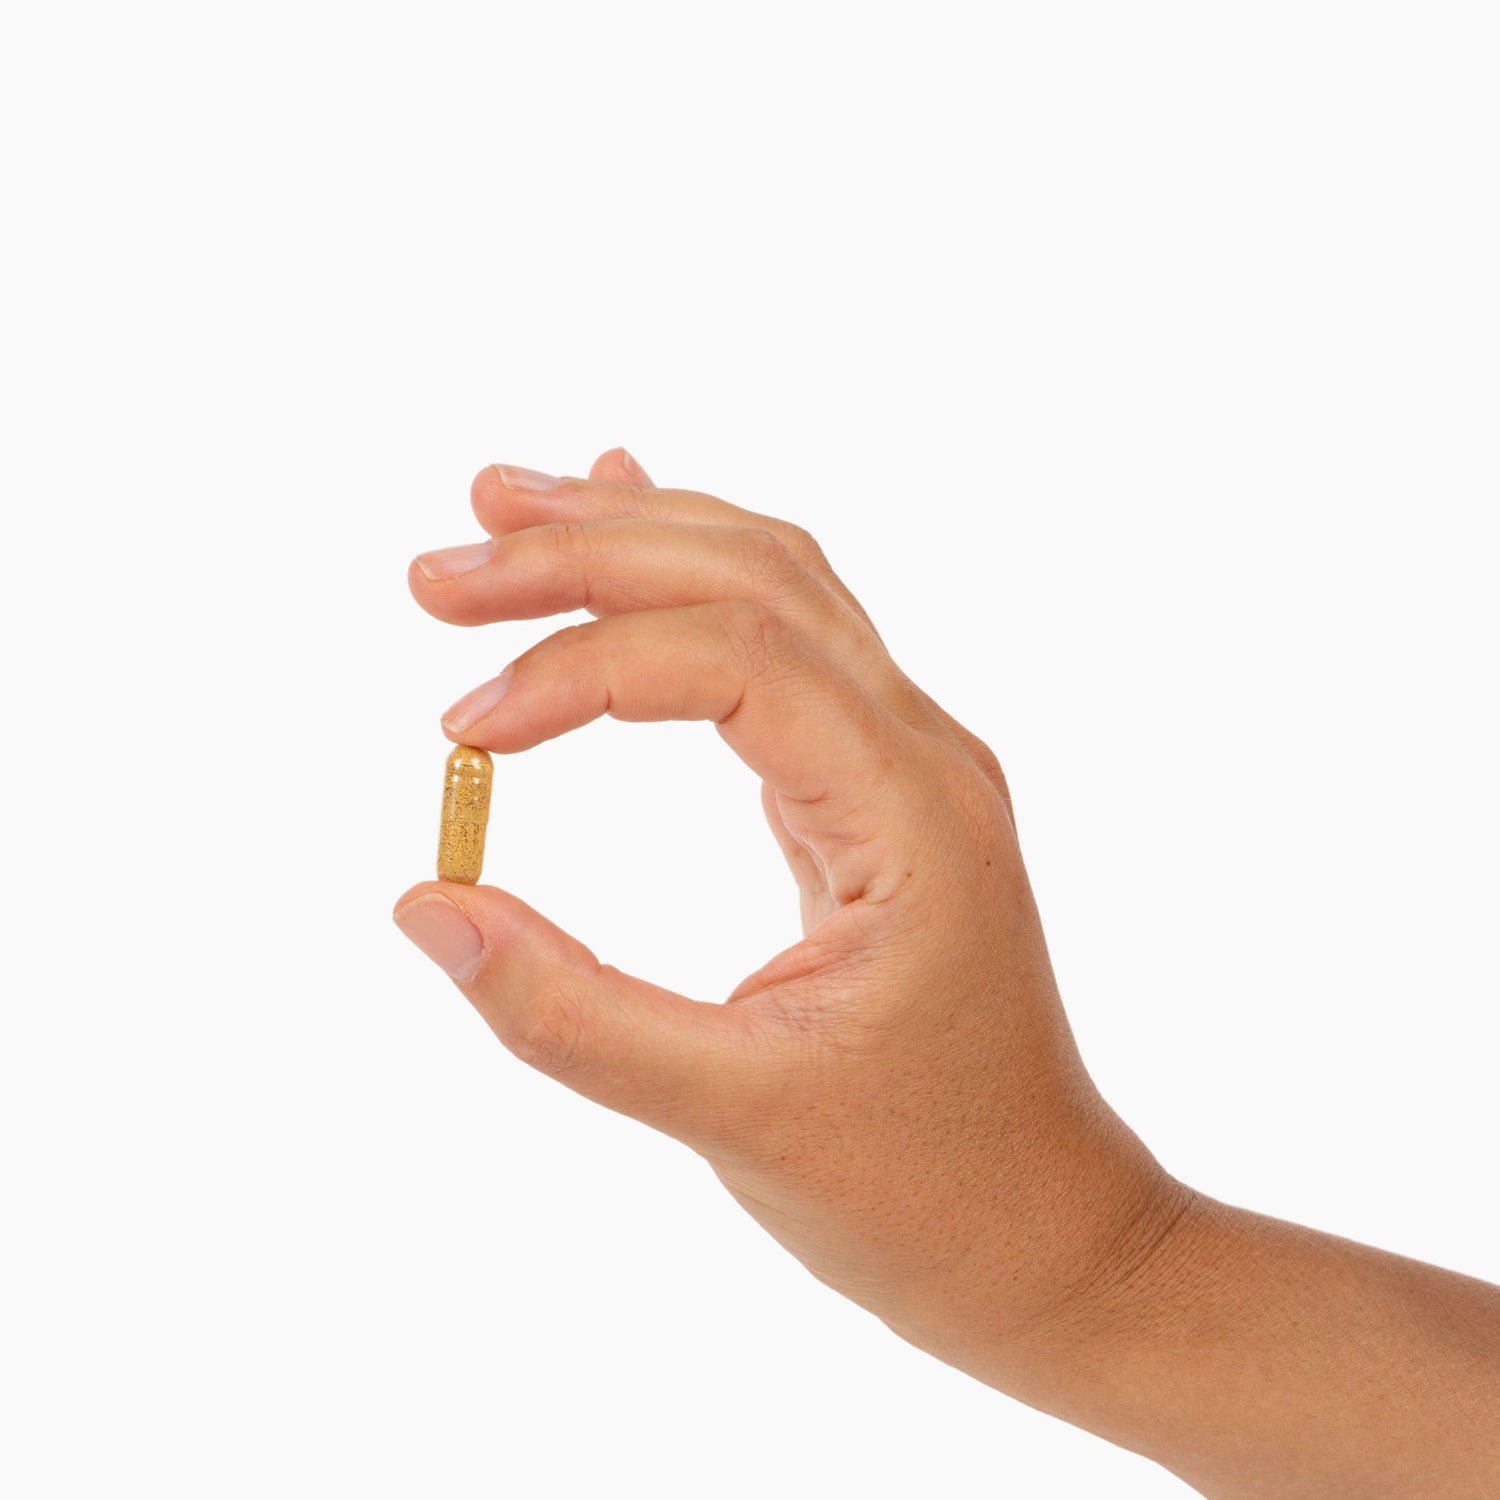 Hand holding one Preverio Glucose Metabolism Support capsule upright to show its small size